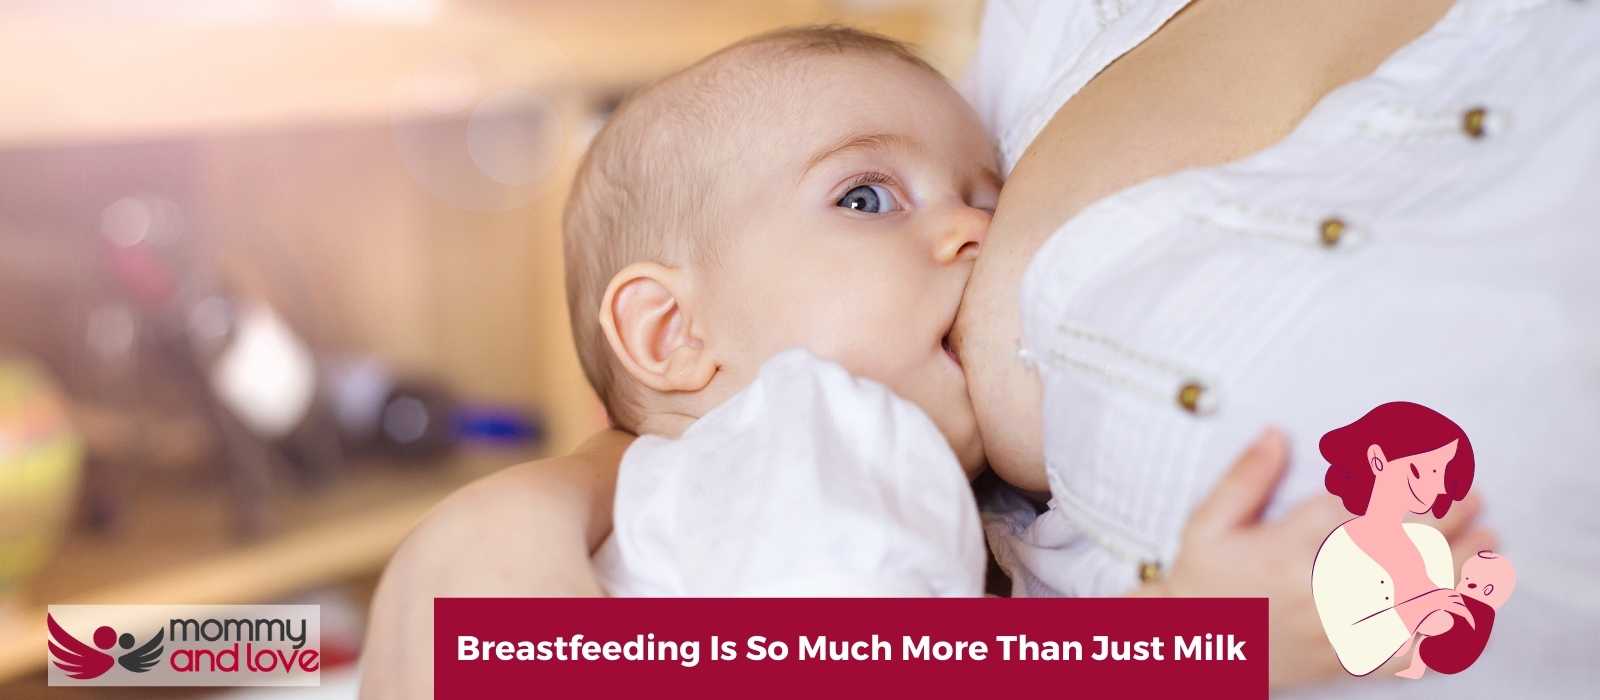 Breastfeeding Is So Much More Than Just Milk